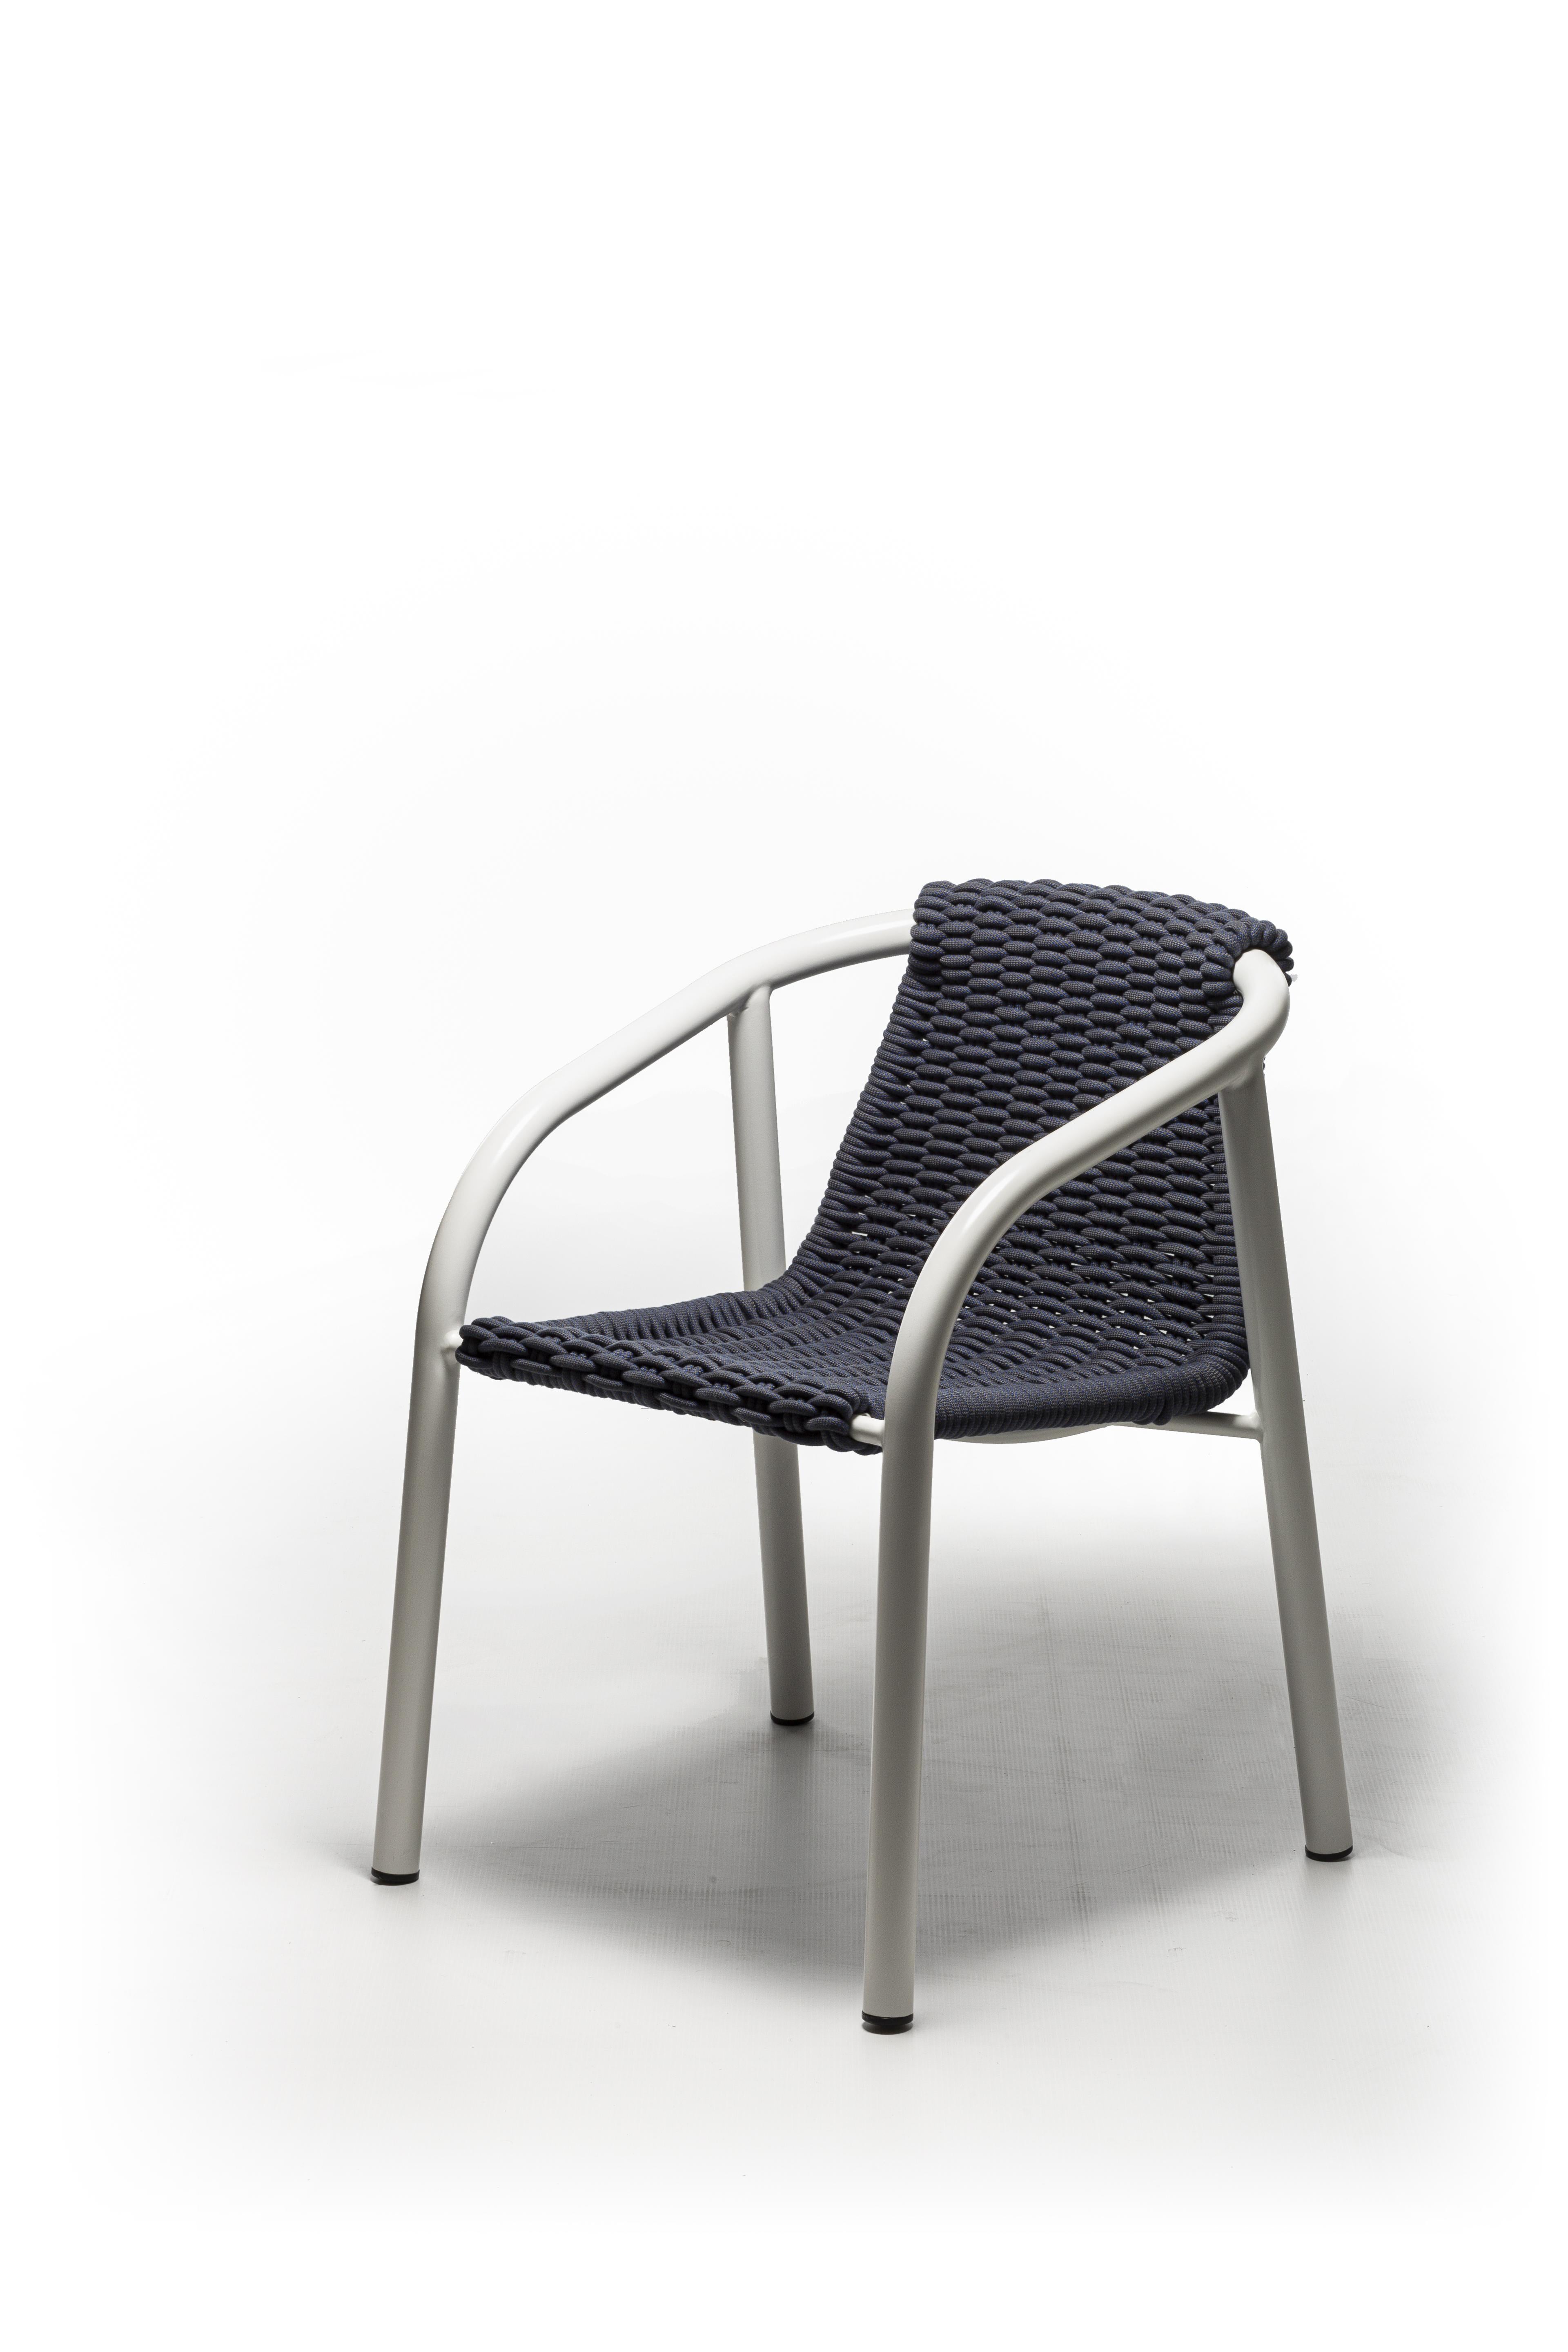 The Ken 23 chair, characterised by a minimal and informal style, is formed by a structure in matt white or grey painted tubular aluminium, a unique metal for its technical qualities, combined with a handmade weaving in grey or blue polyester